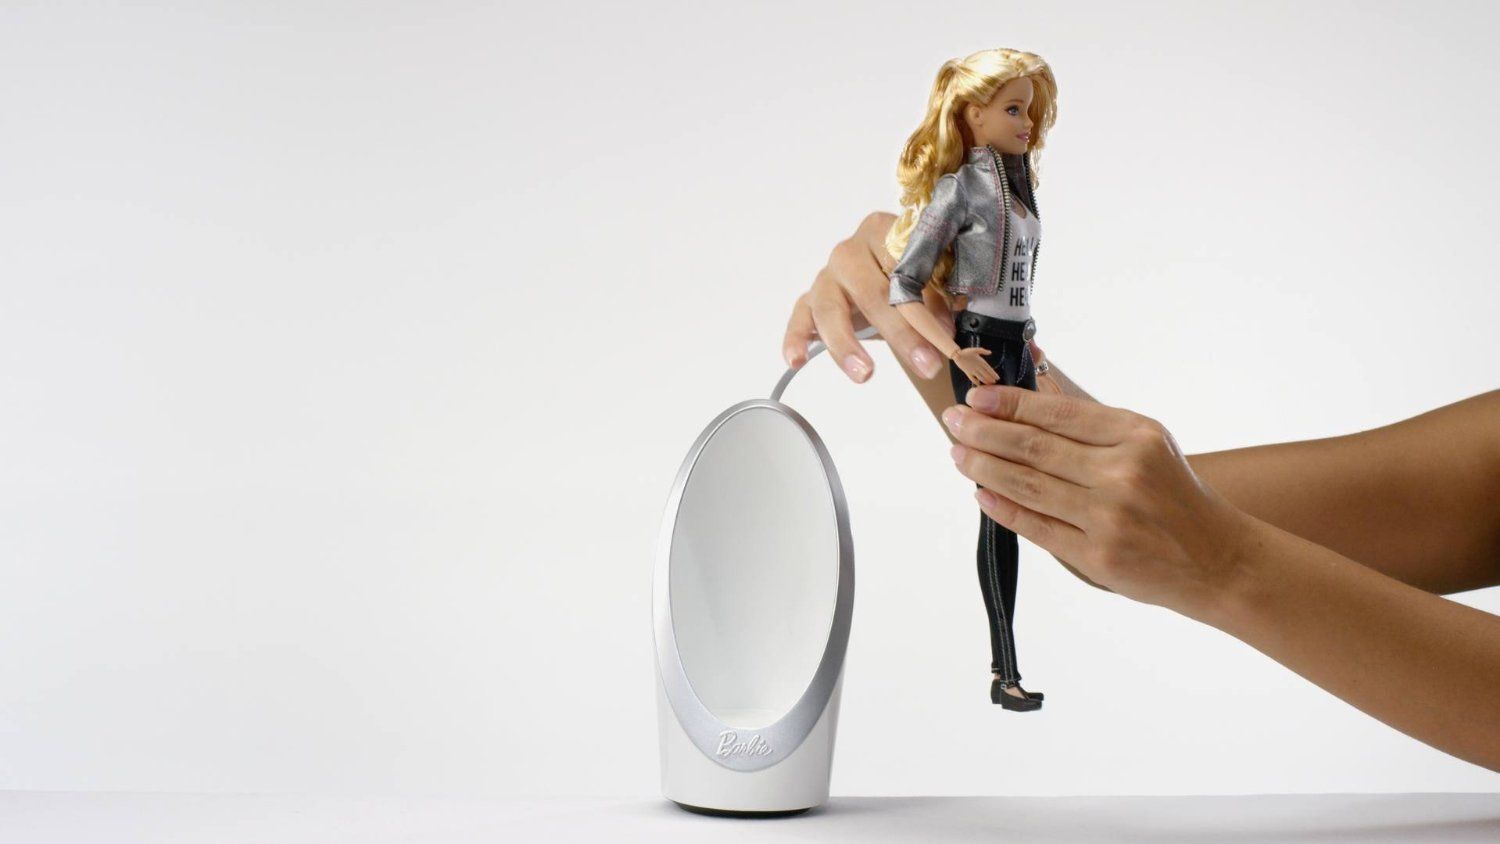 Hello Barbie: she can listen and talk